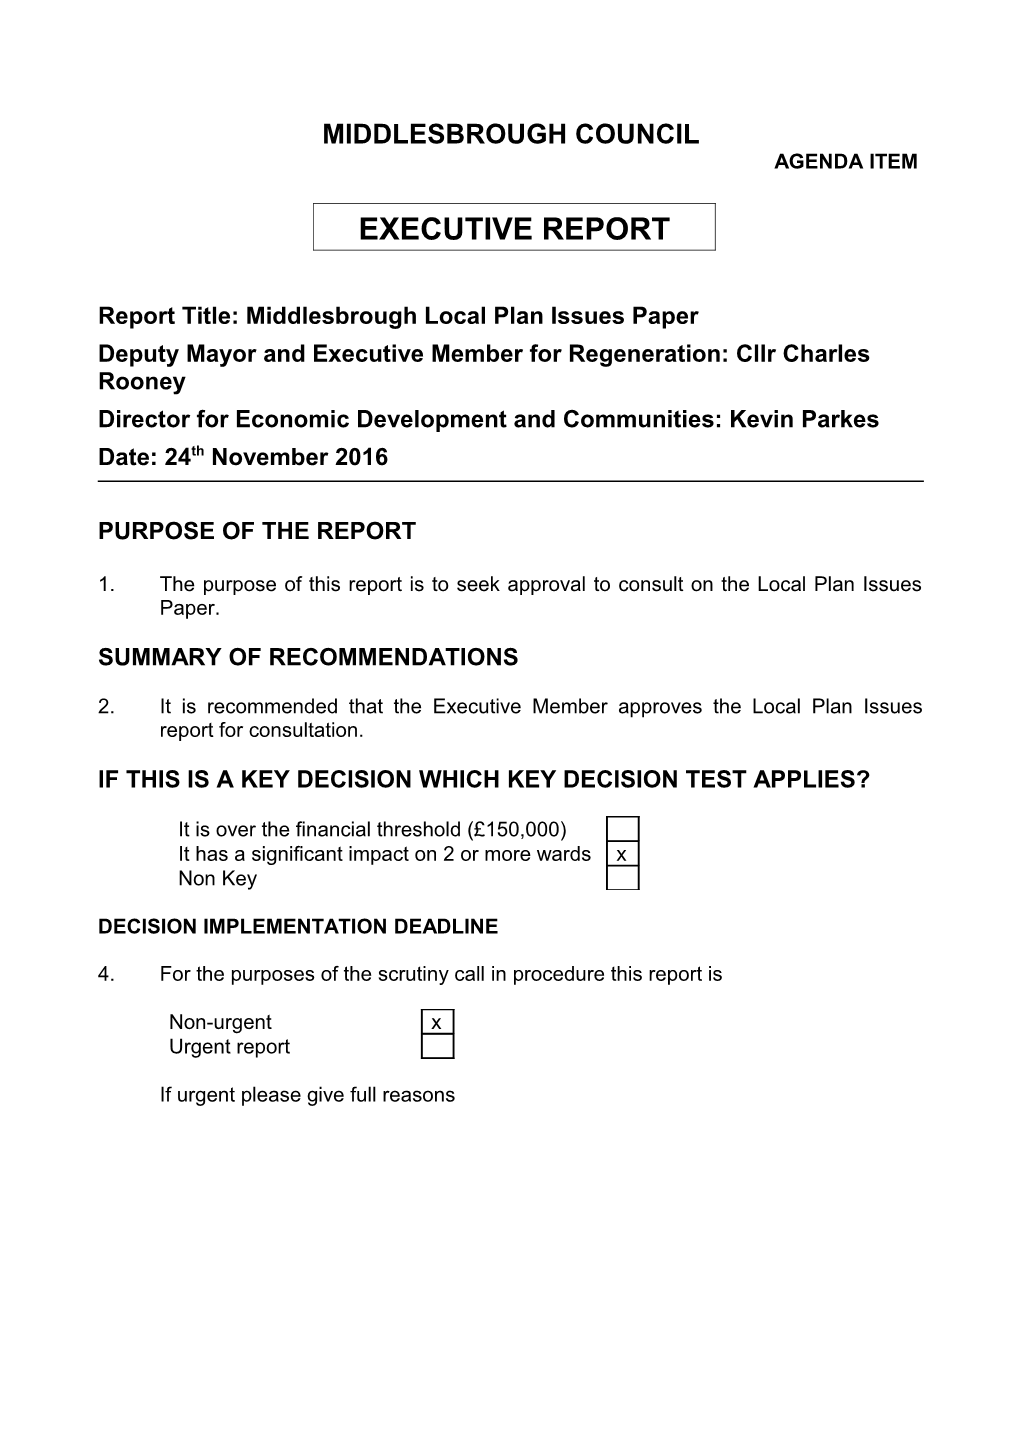 Report Title: Middlesbrough Local Plan Issues Paper